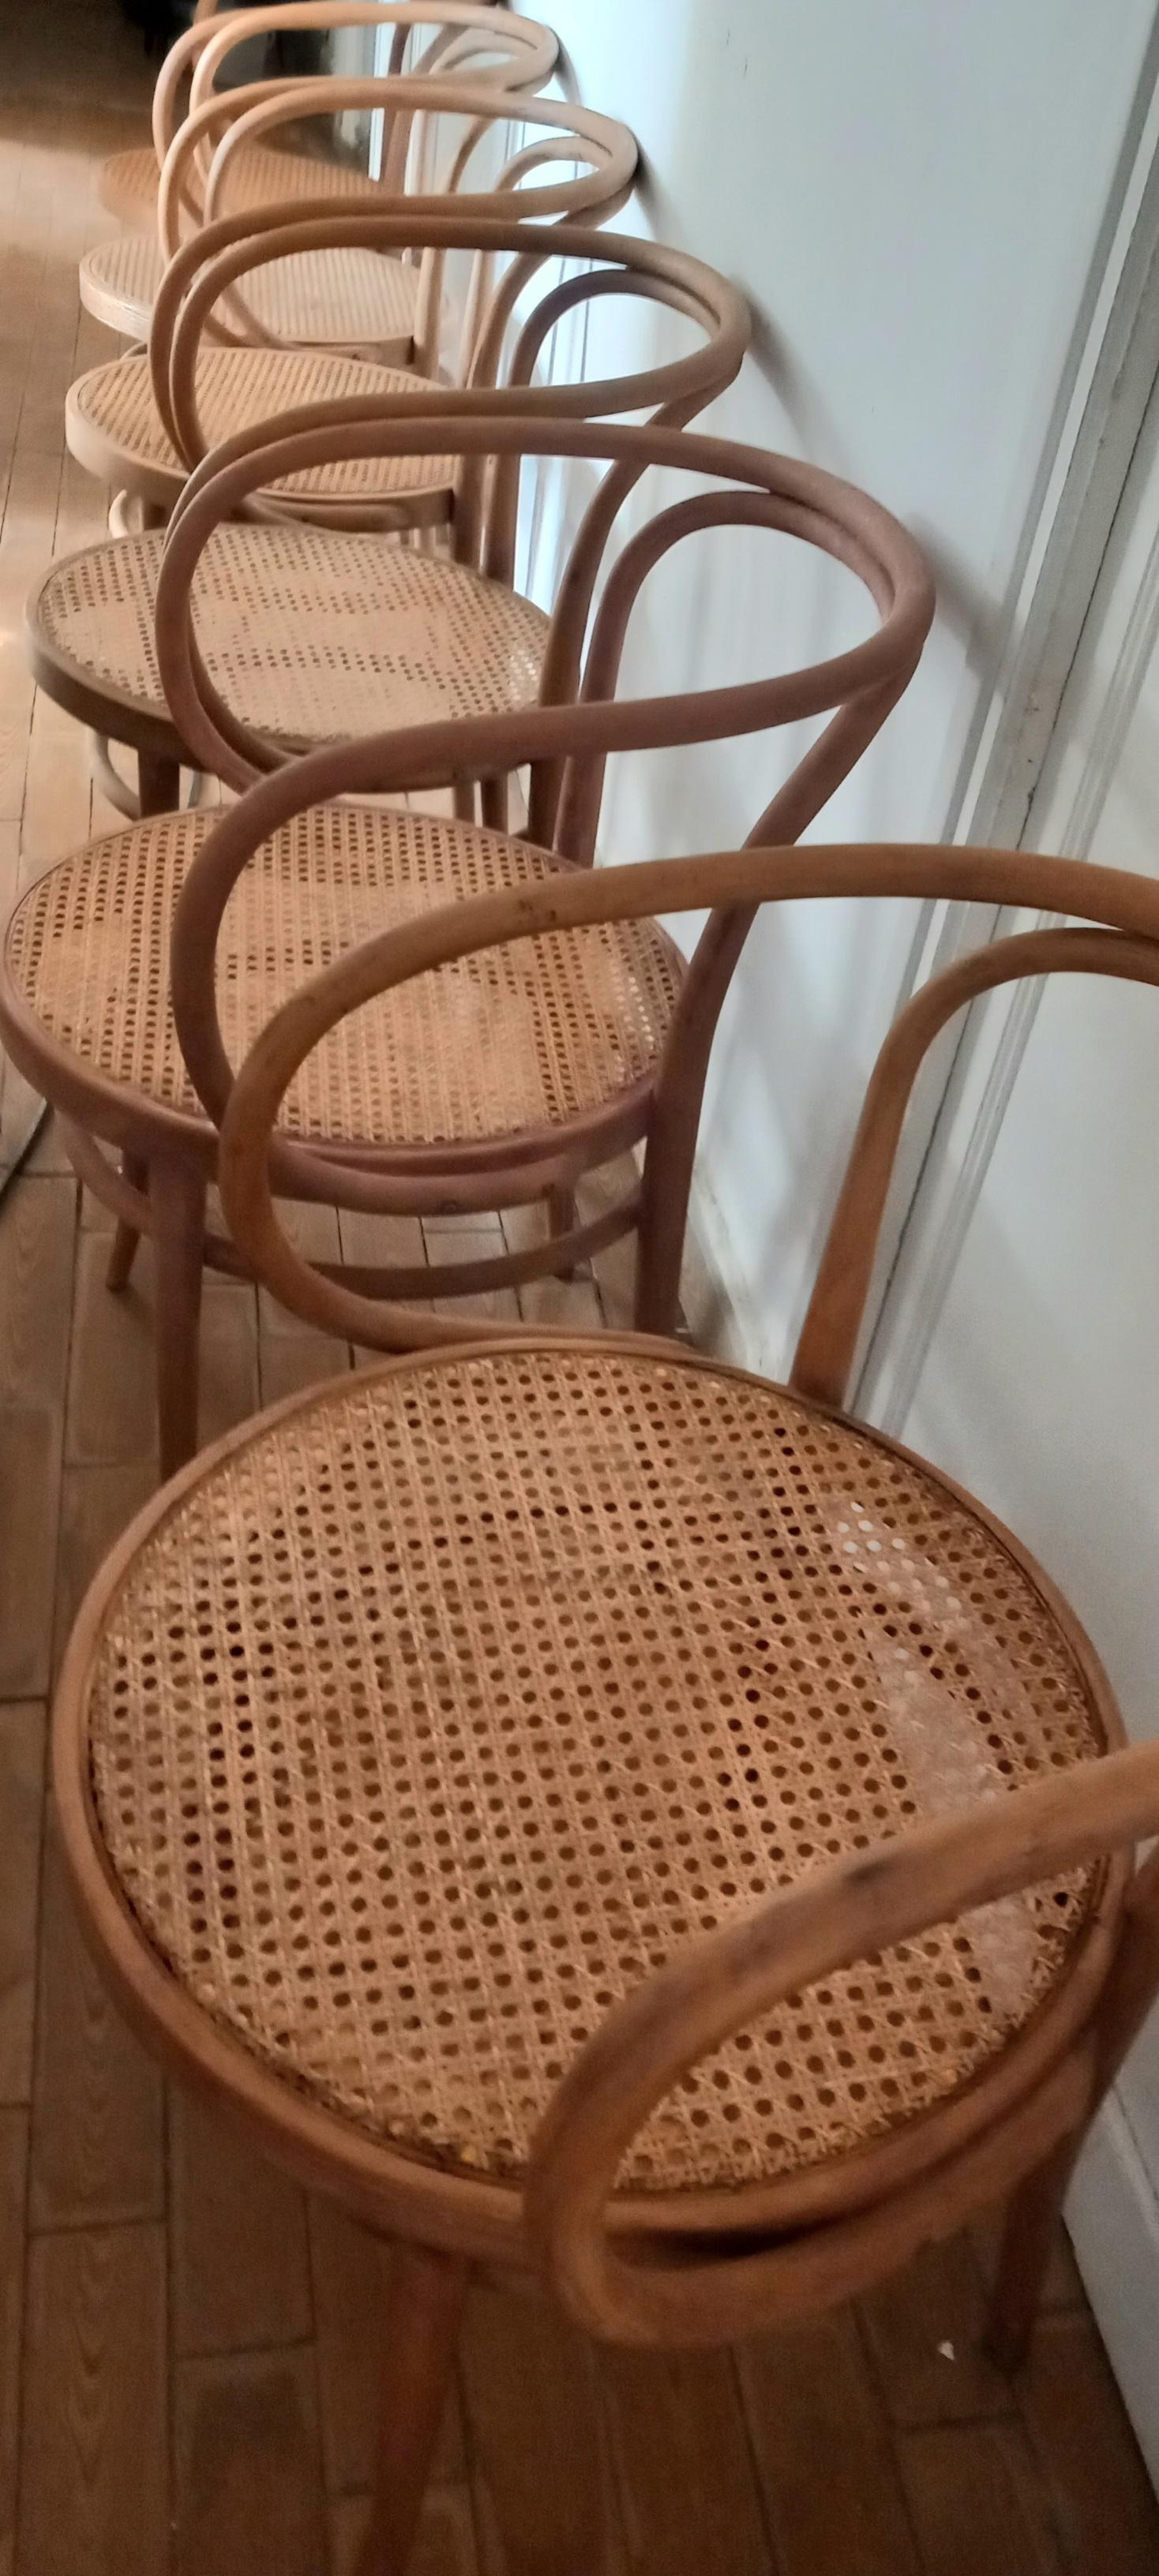 Six Midcentury Cane Bentwood Chair After Thonet 209, 1950s For Sale 3